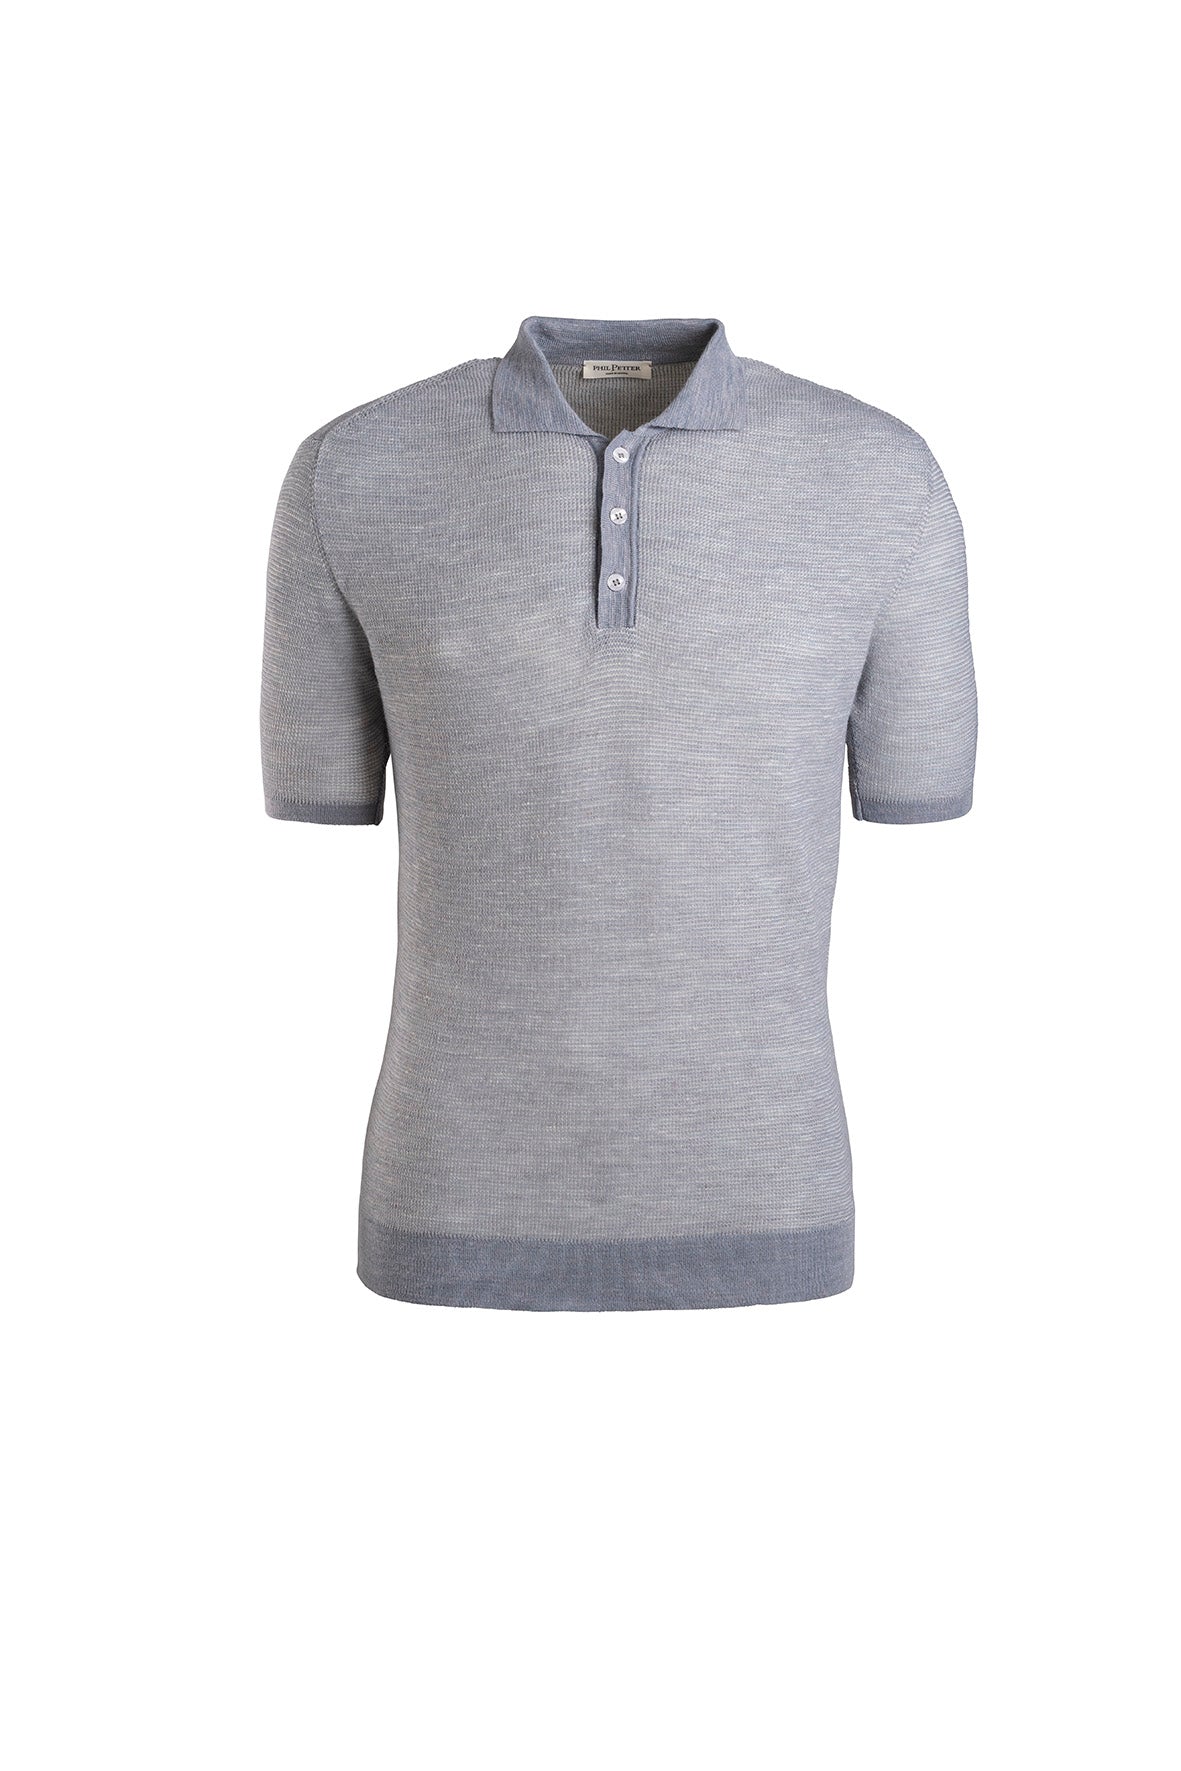 PHIL PETTER V-Polo Double Royal Stitch | Silver